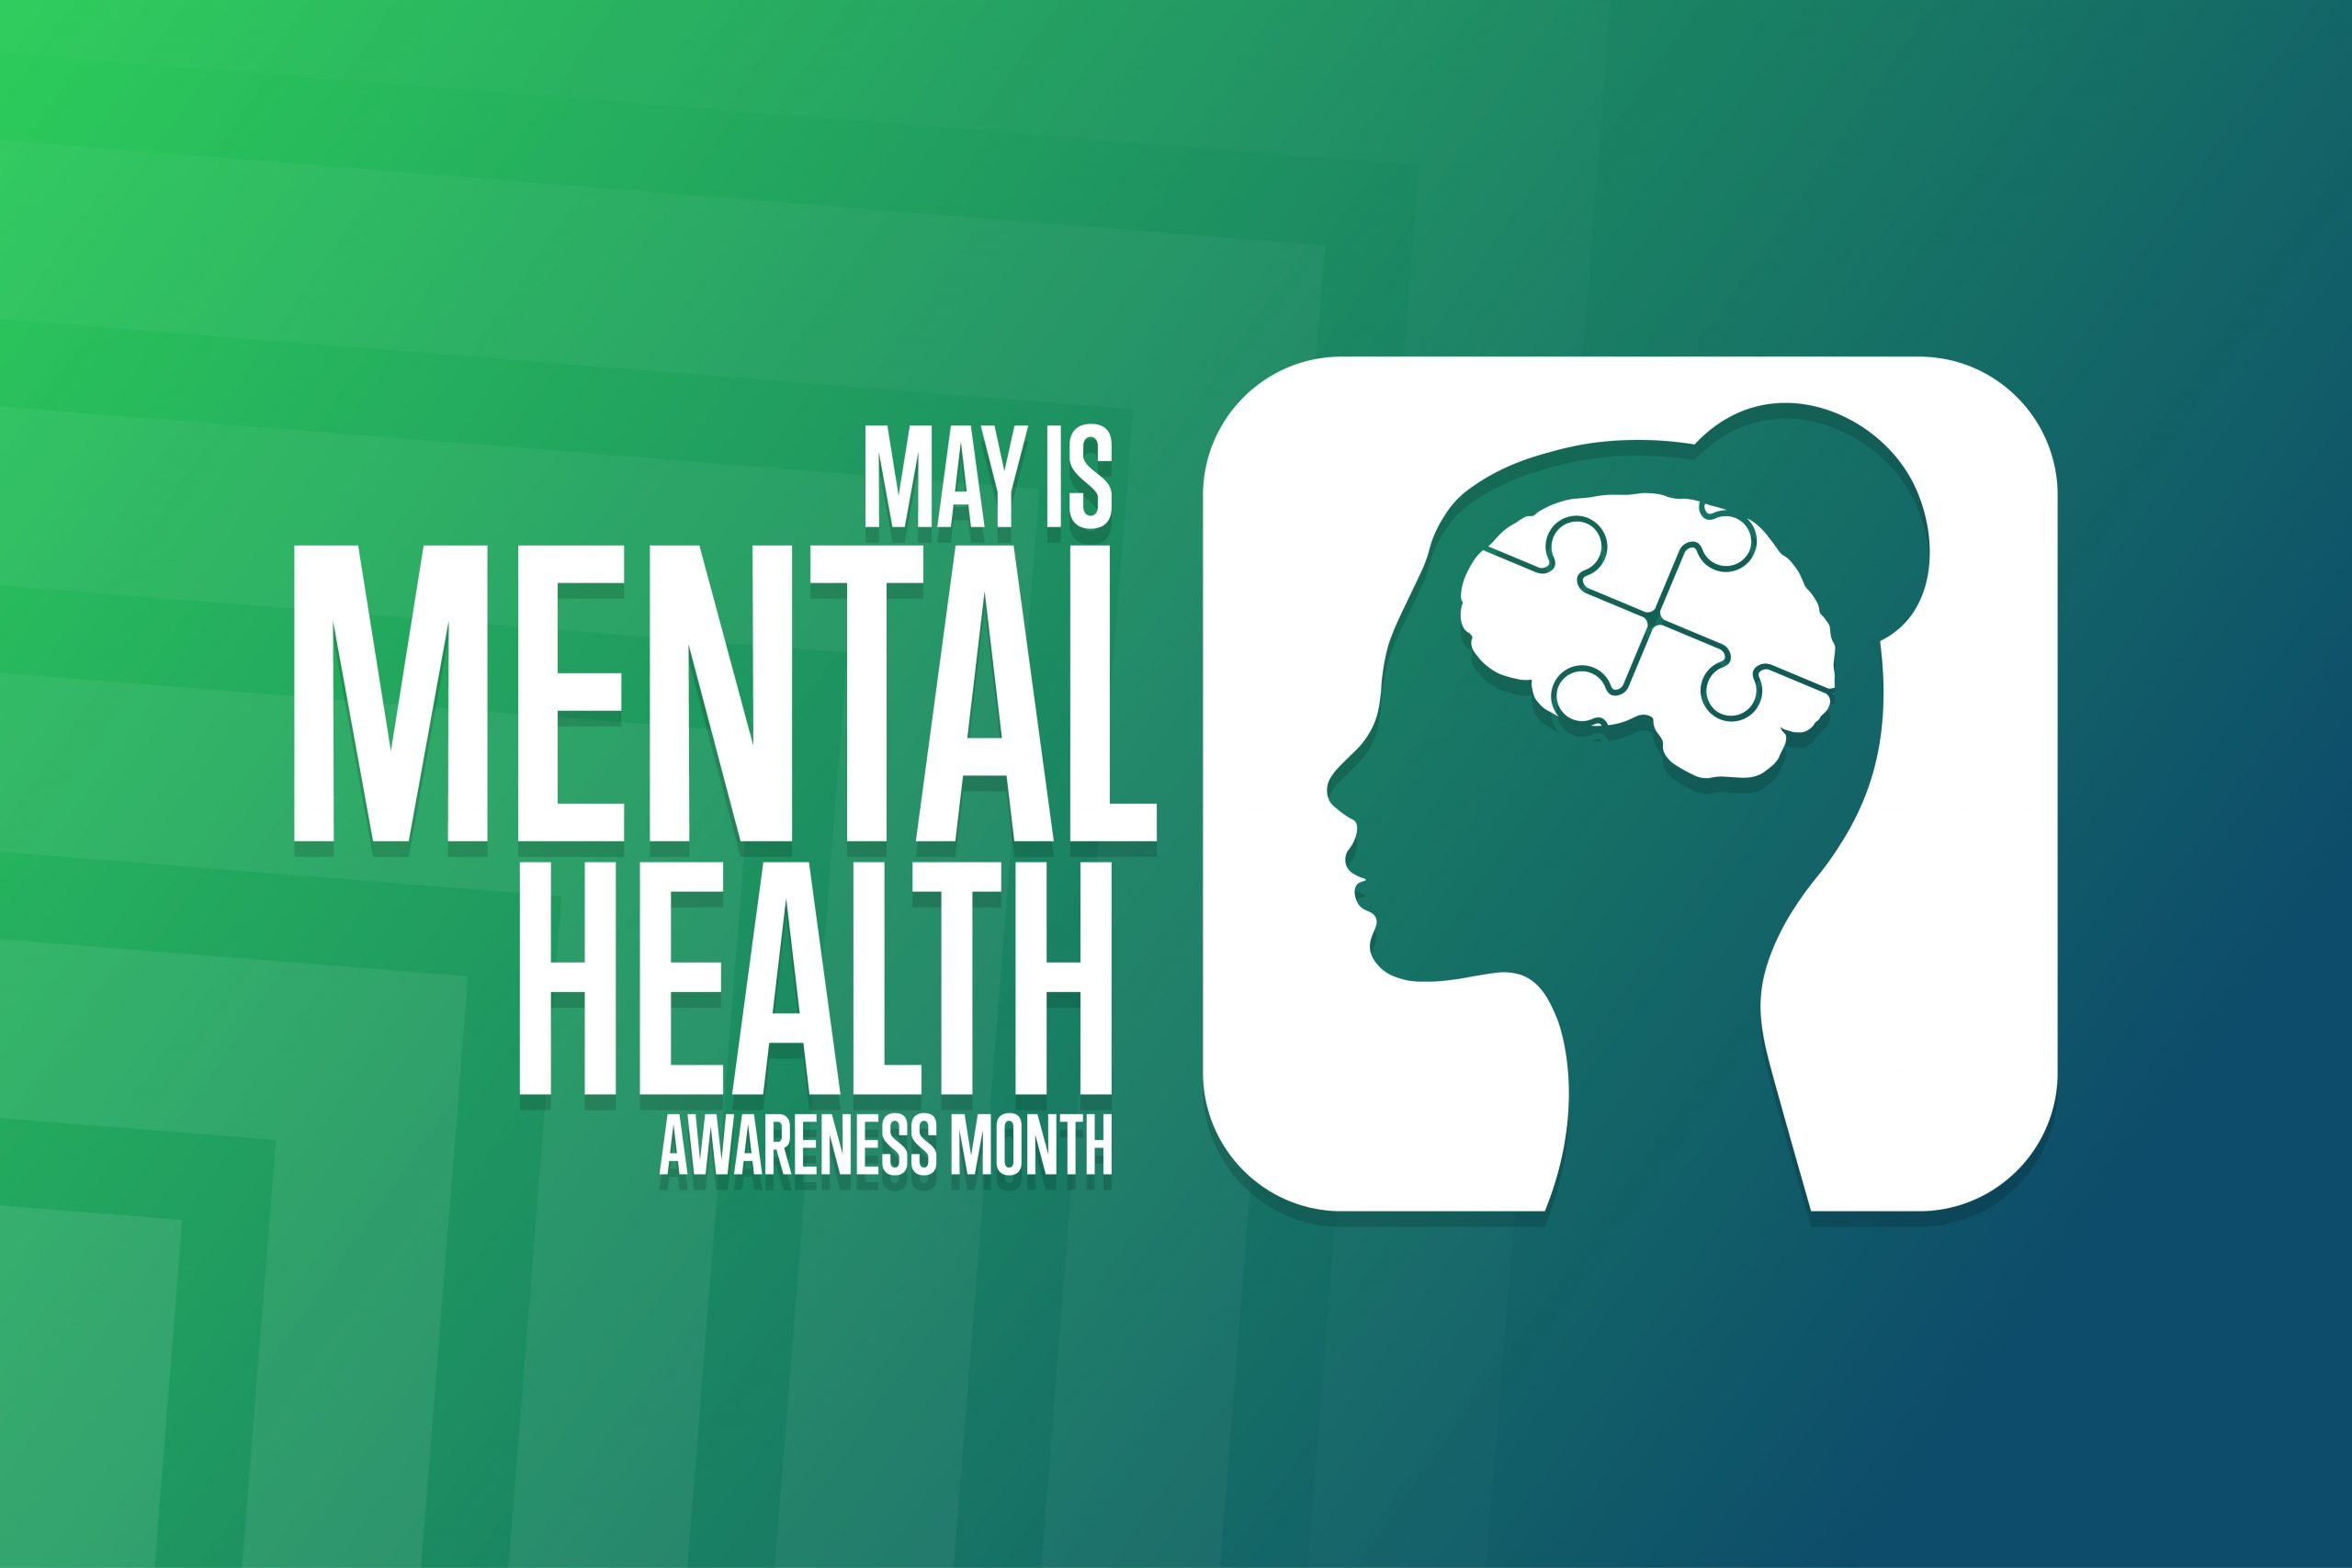 Mental Health Awareness Month: What is it?